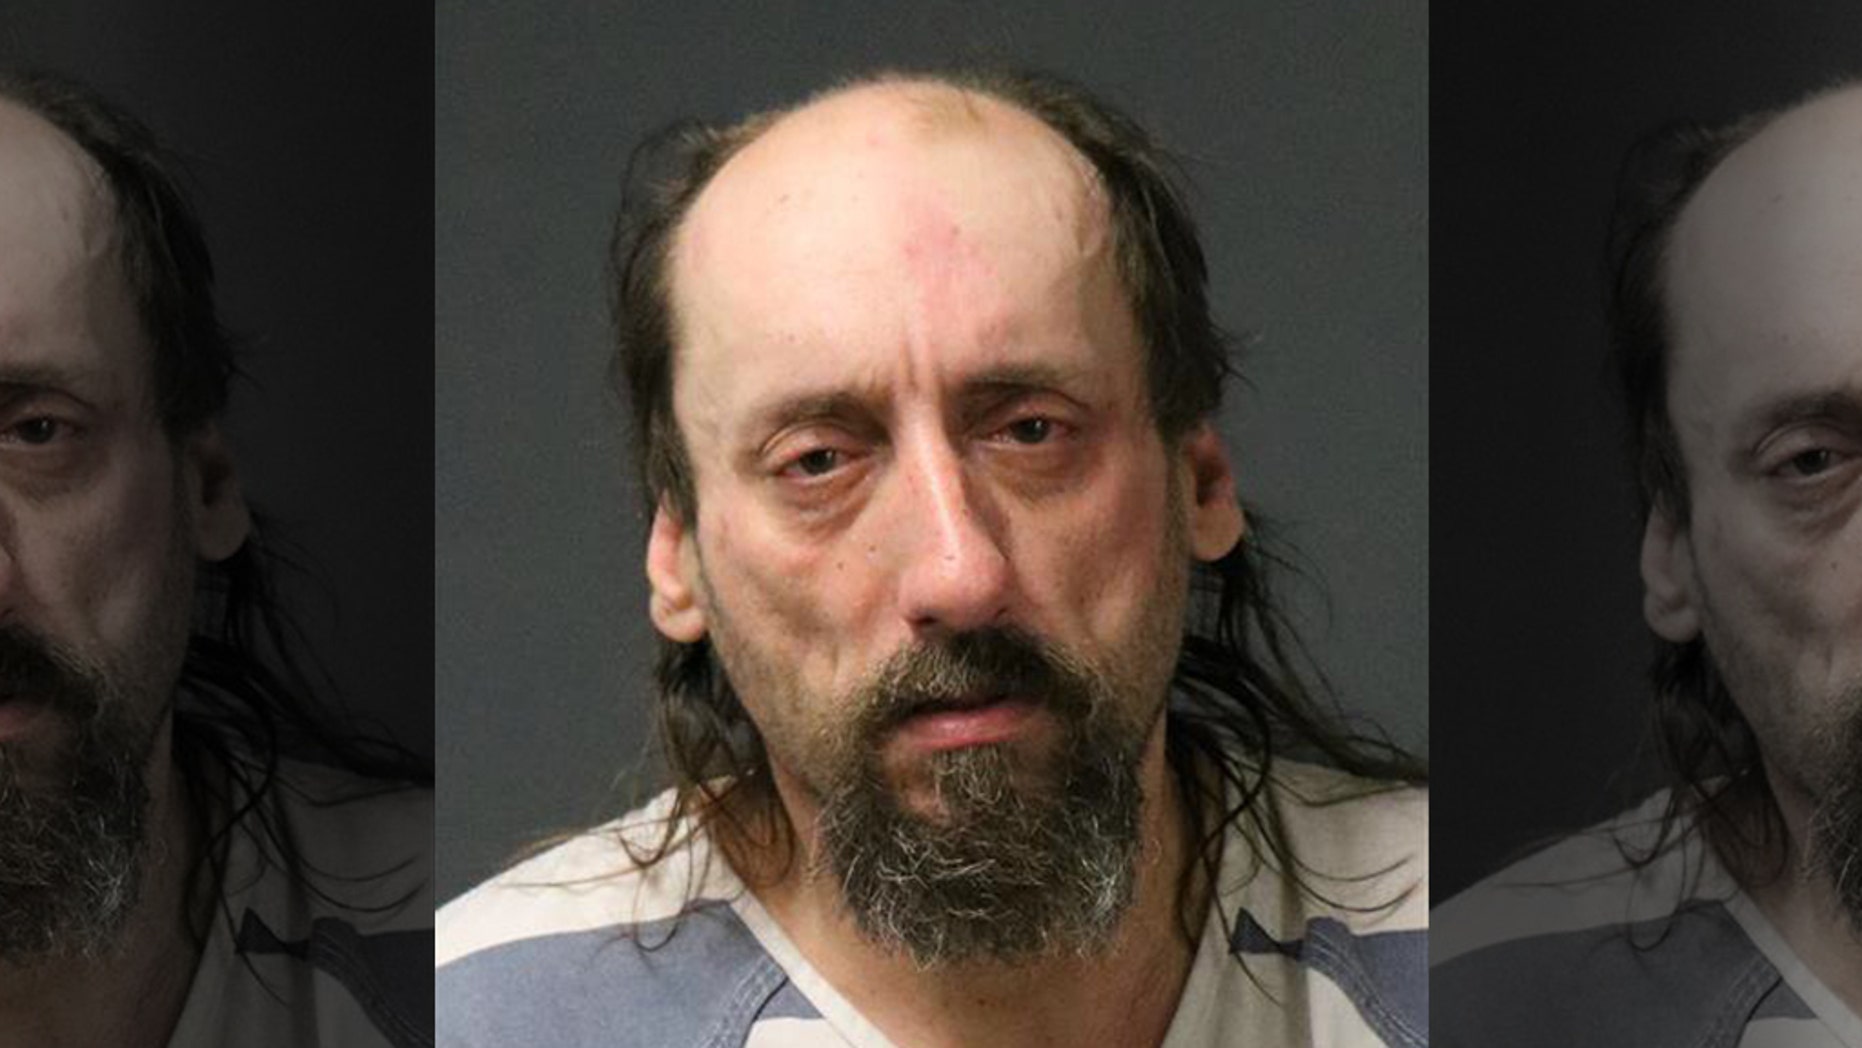 Pennsylvania man handcuffed wife in car because he feared she was cheating, cops say